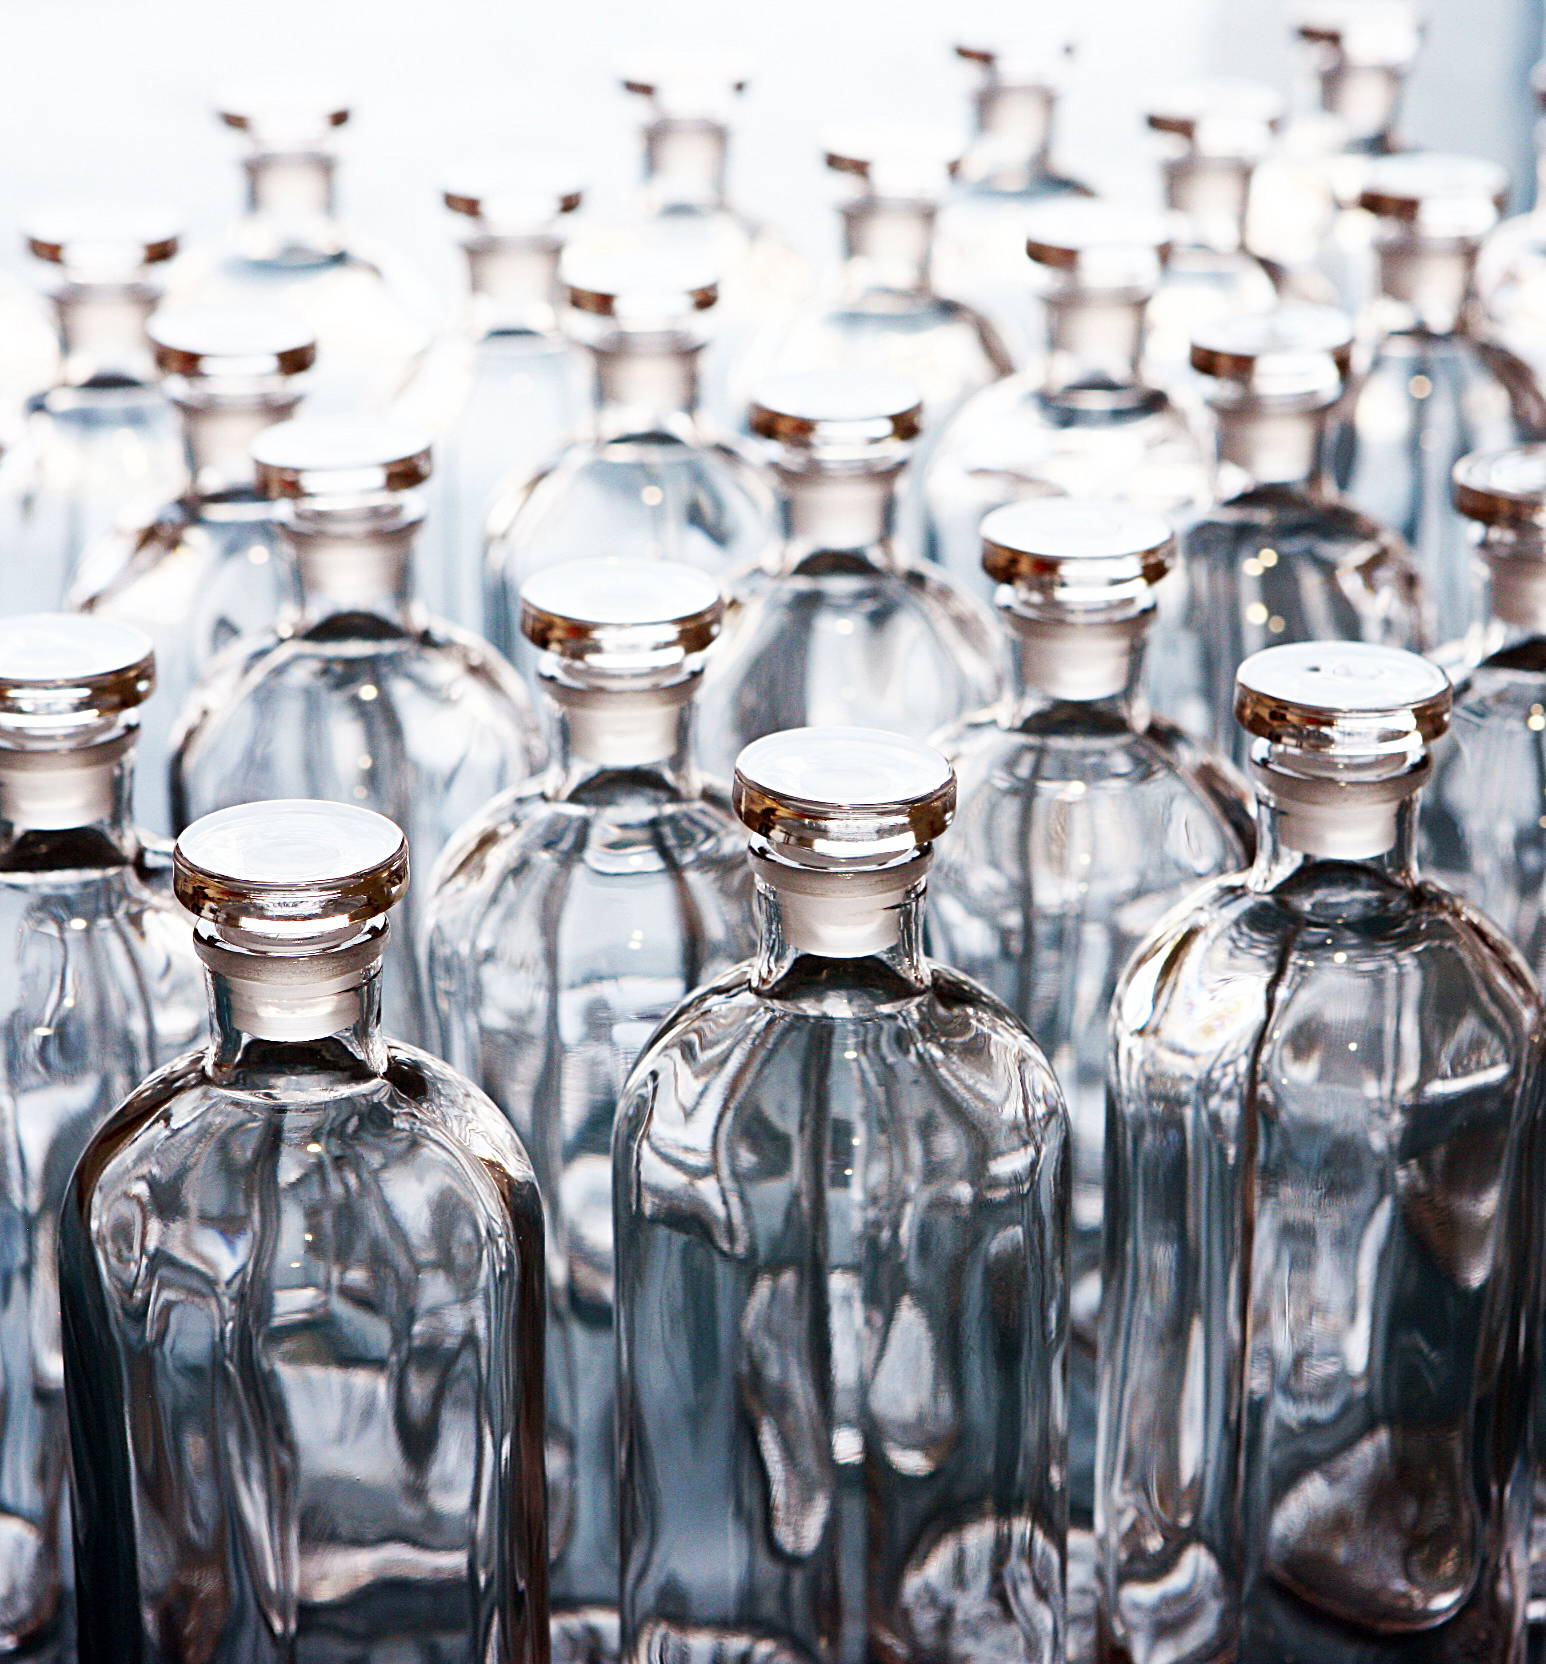 Production of Crystal Decanters